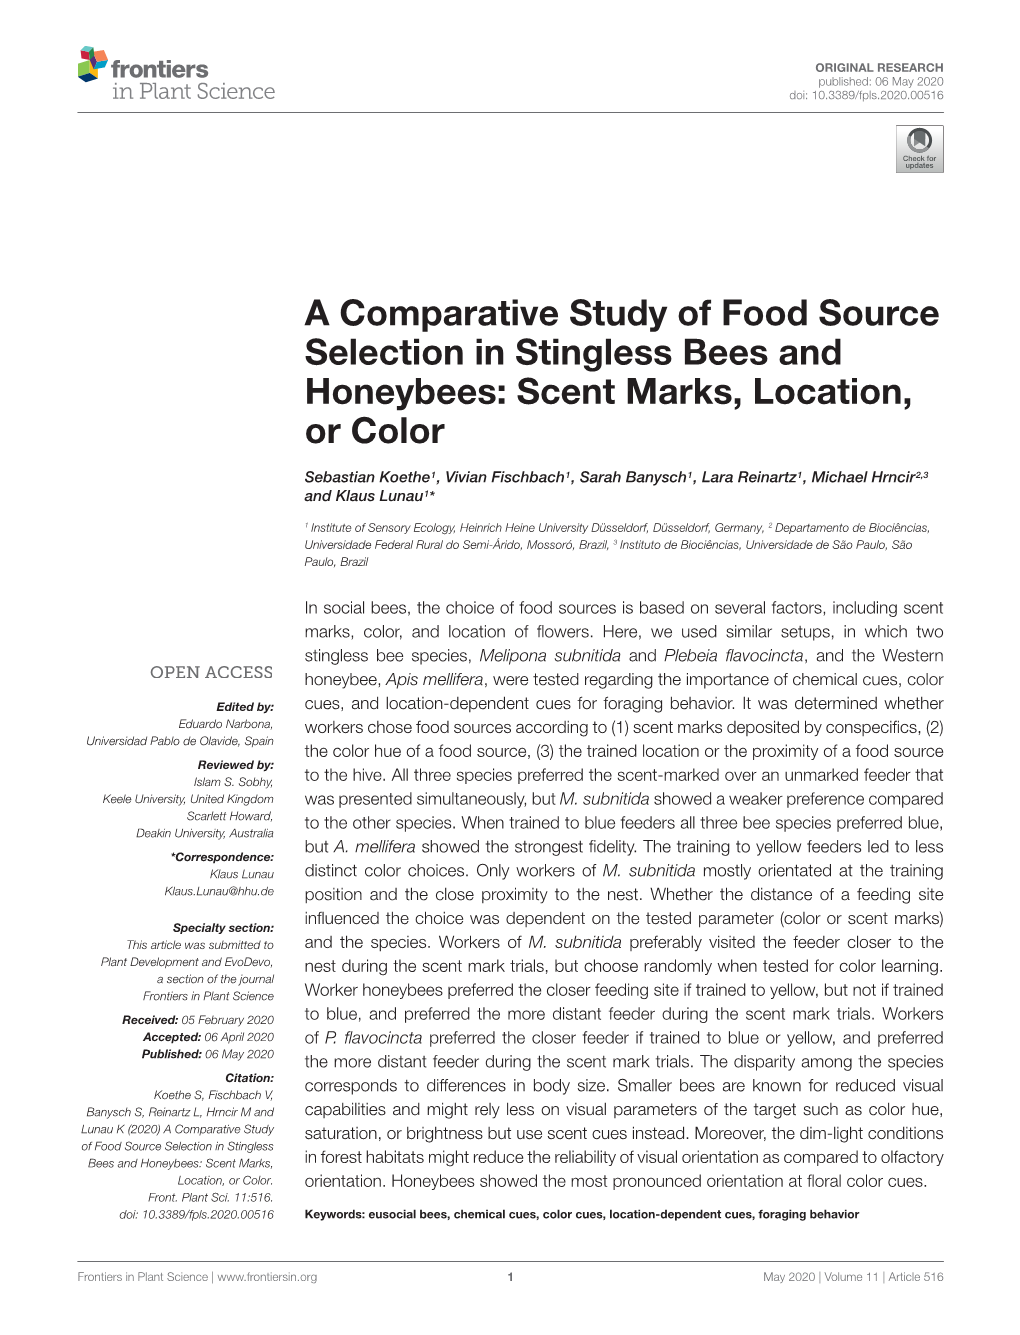 A Comparative Study of Food Source Selection in Stingless Bees and Honeybees: Scent Marks, Location, Or Color